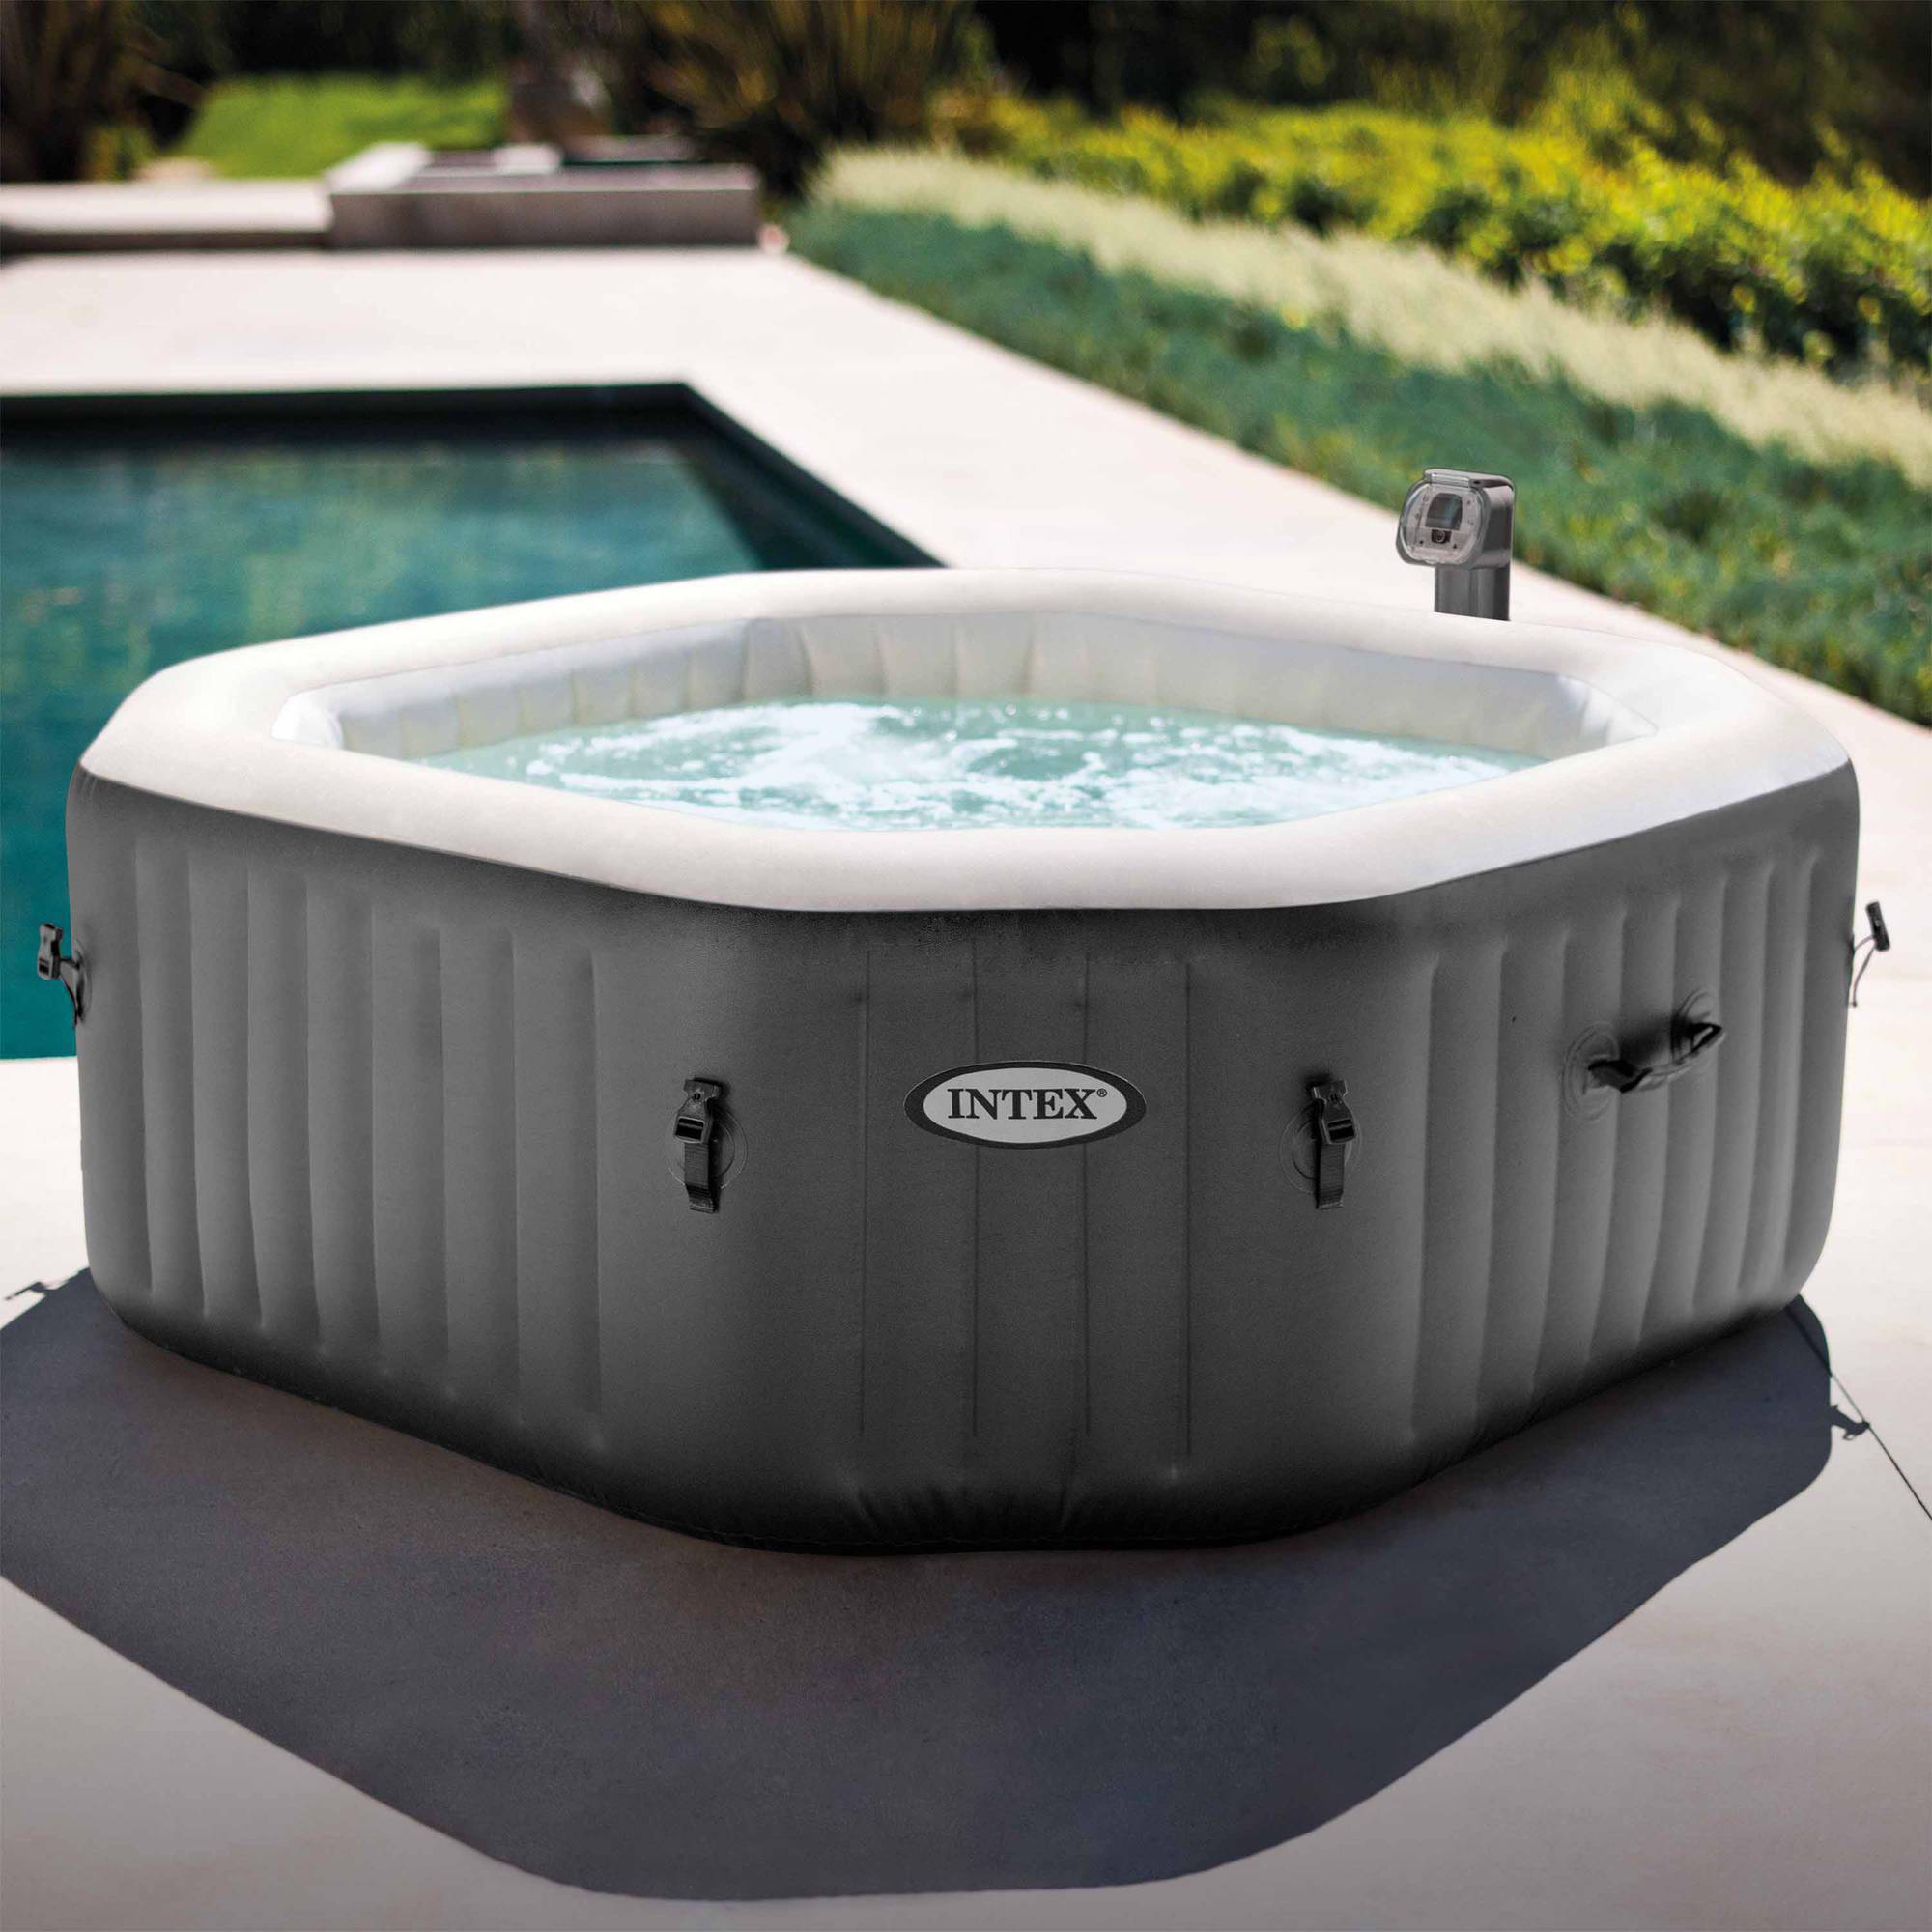 Intex 120 Bubble Jets 4-Person Octagonal Portable Inflatable Hot Tub Spa, Gray - image 2 of 9